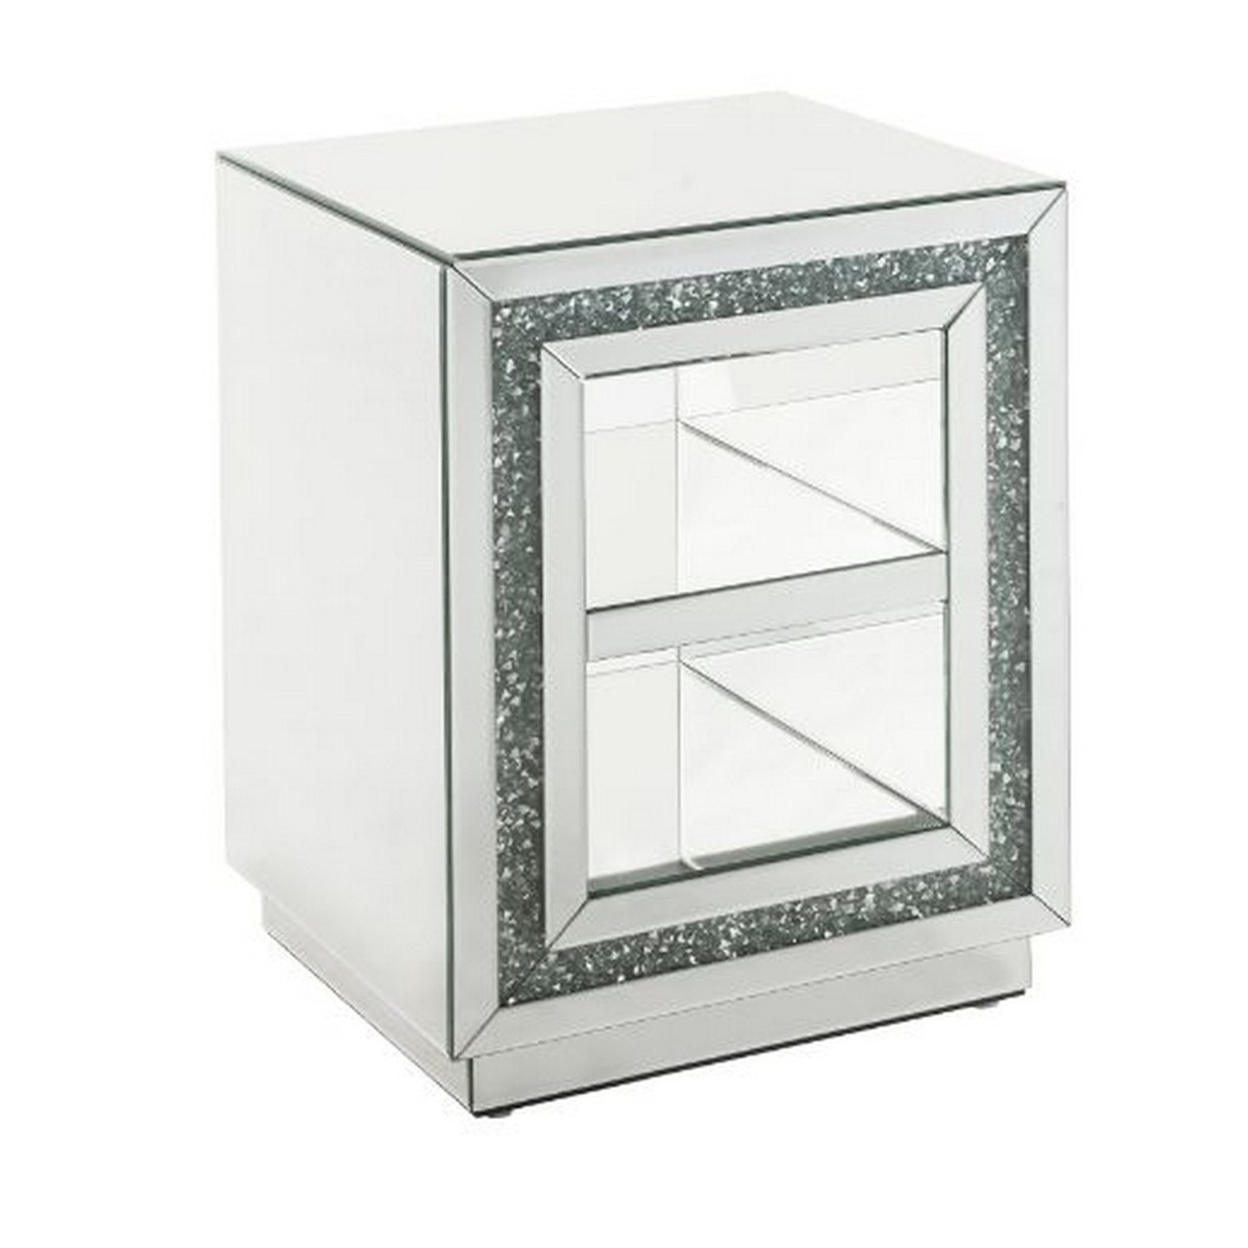 End Table With Mirror Framing And Faux Diamonds, Silver- Saltoro Sherpi